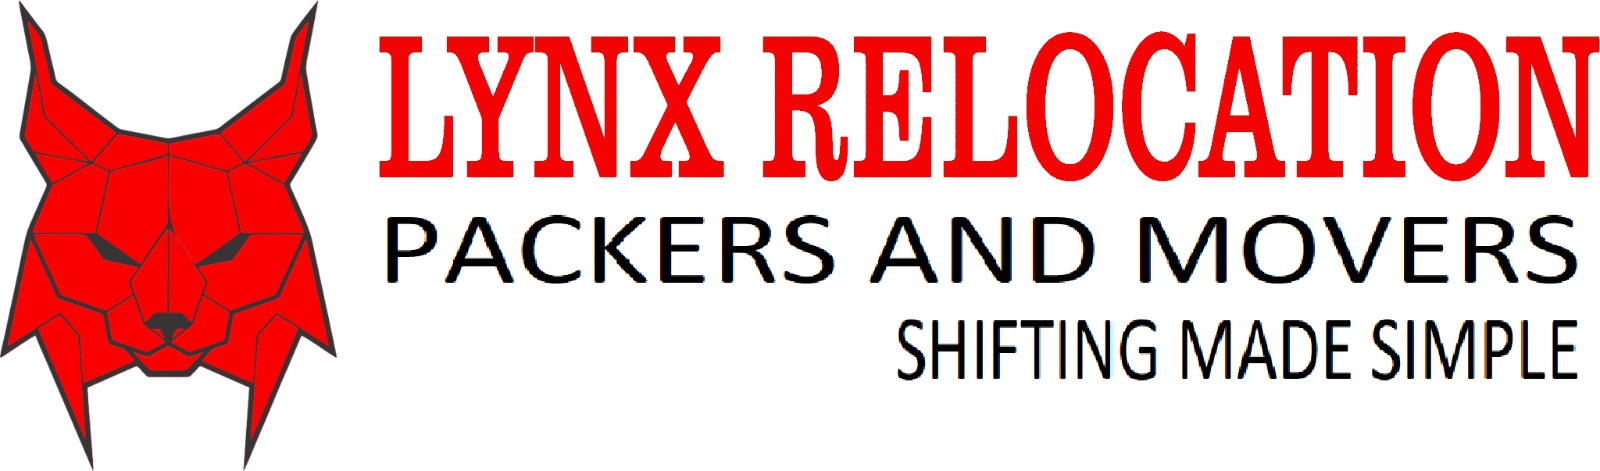 Lynx Relocation Packers & Movers